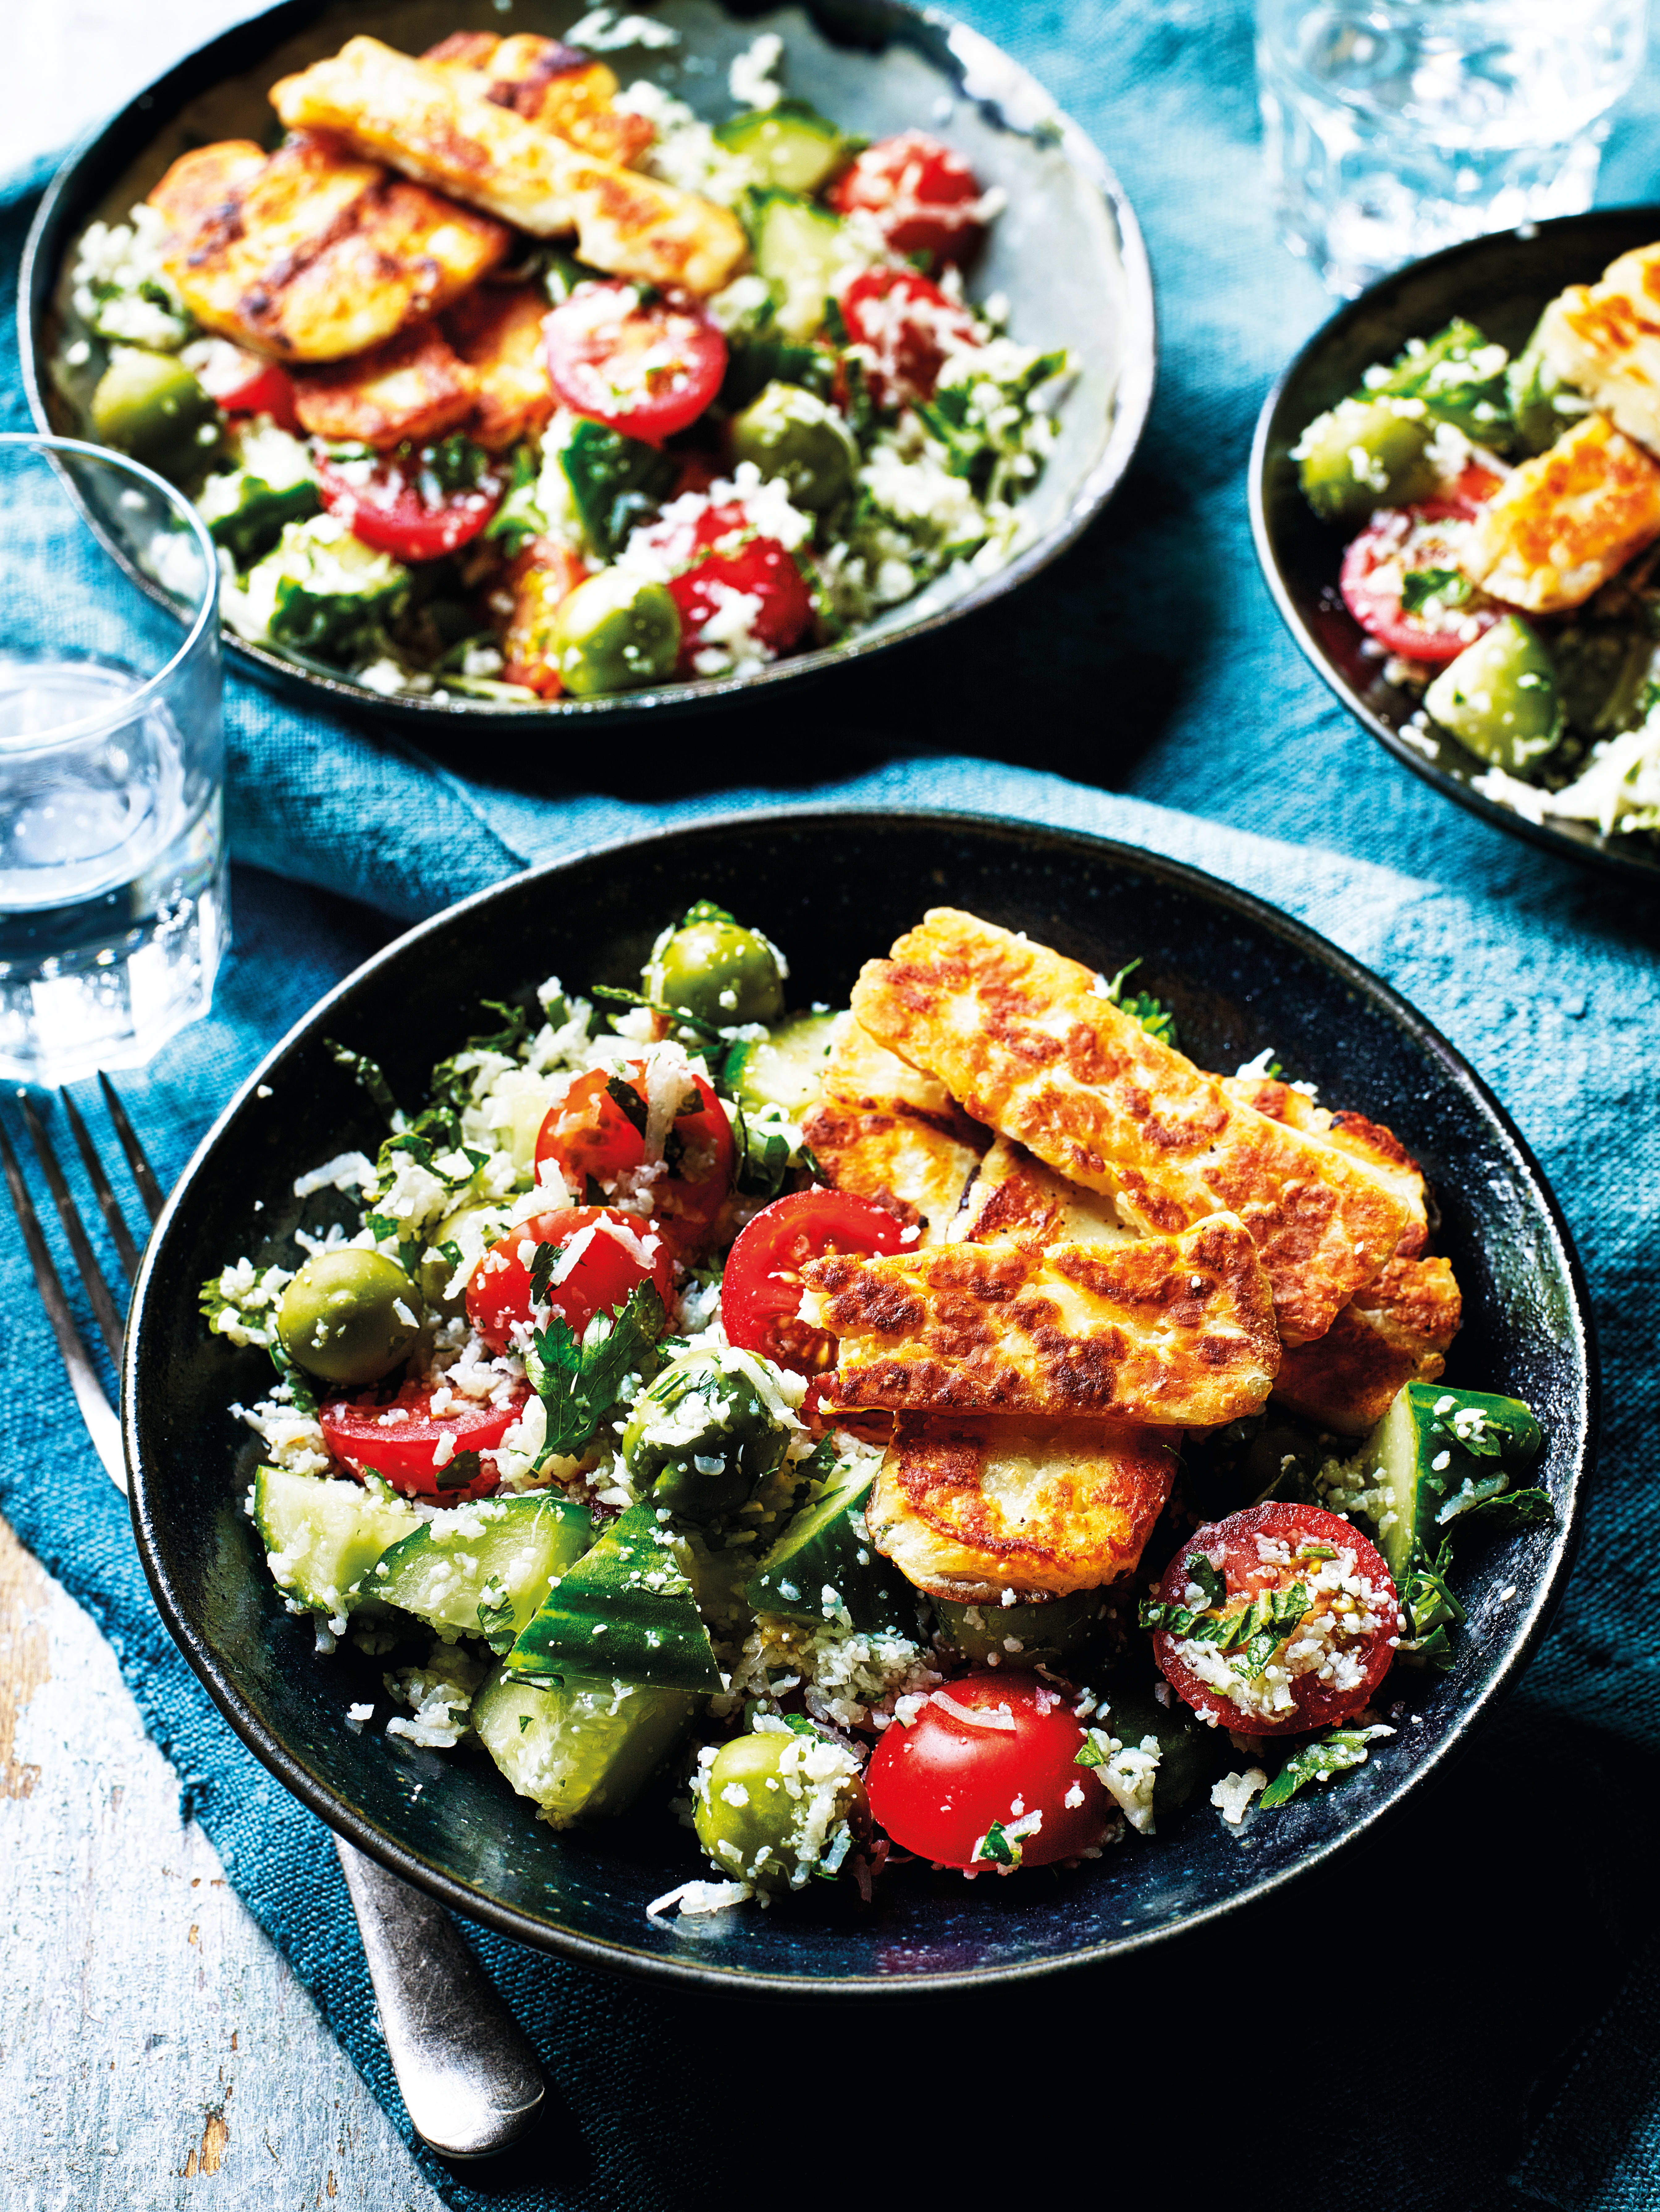 Photo of Cauliflower tabbouleh with griddled halloumi by WW